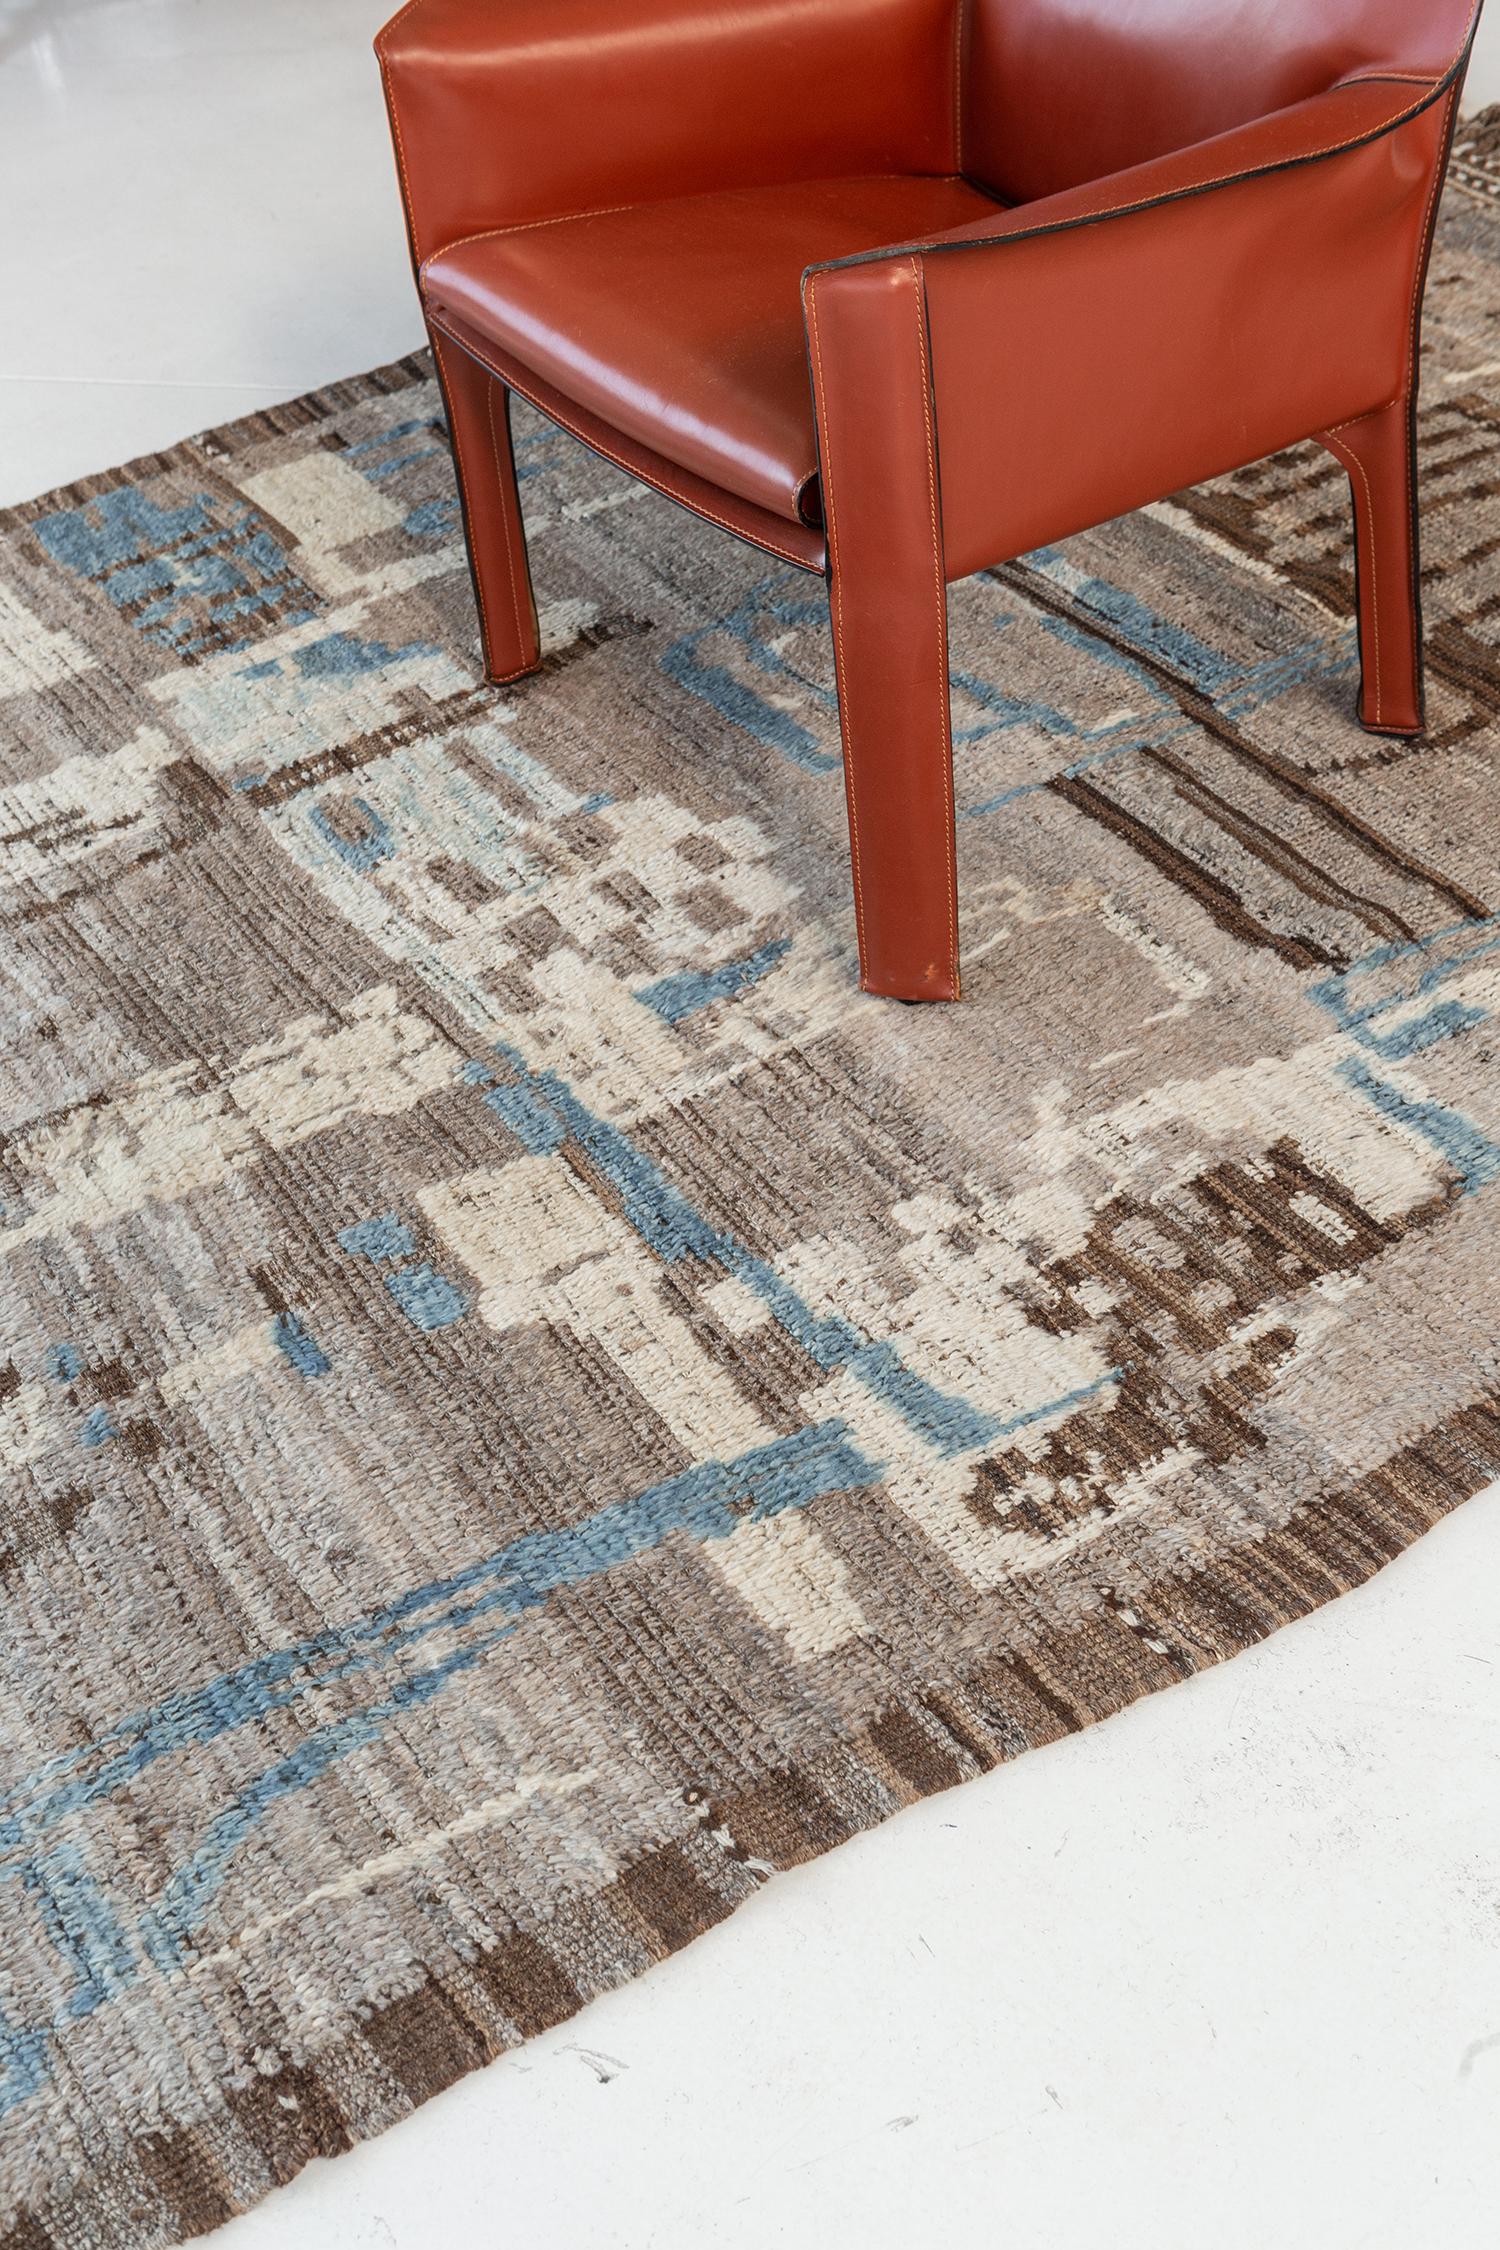 Meliska is a captivating textured rug with irregular motifs inspired by the Atlas Mountains of Morocco. Earthy tones of ivory, blue, and chocolate brown surrounded by umber brown shag work cohesively to make for a great contemporary interpretation